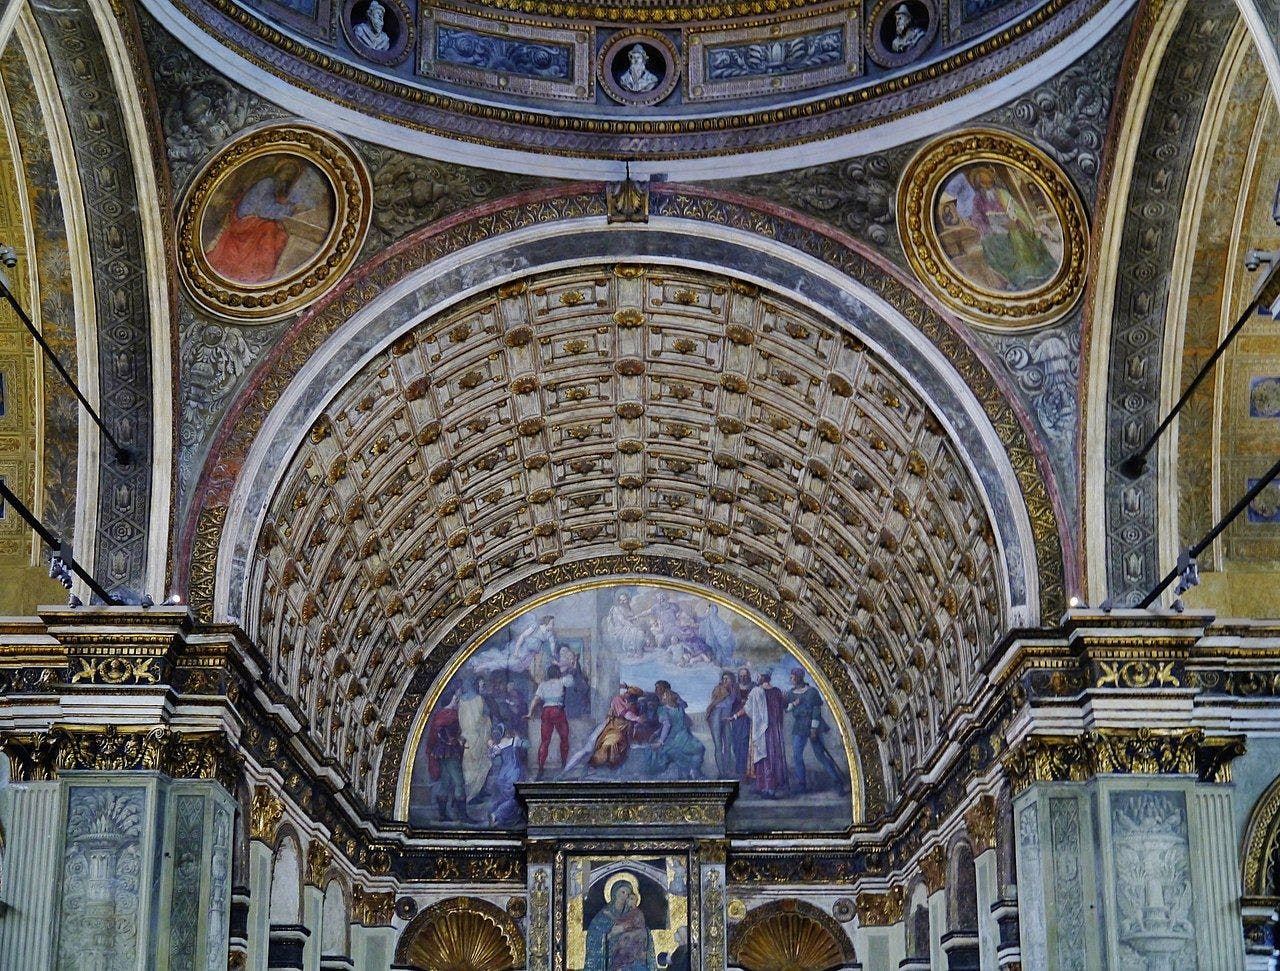 Frontal view of the transept behind the altar (by Zairon, CC BY-SA 4.0, via Wikimedia Commons)